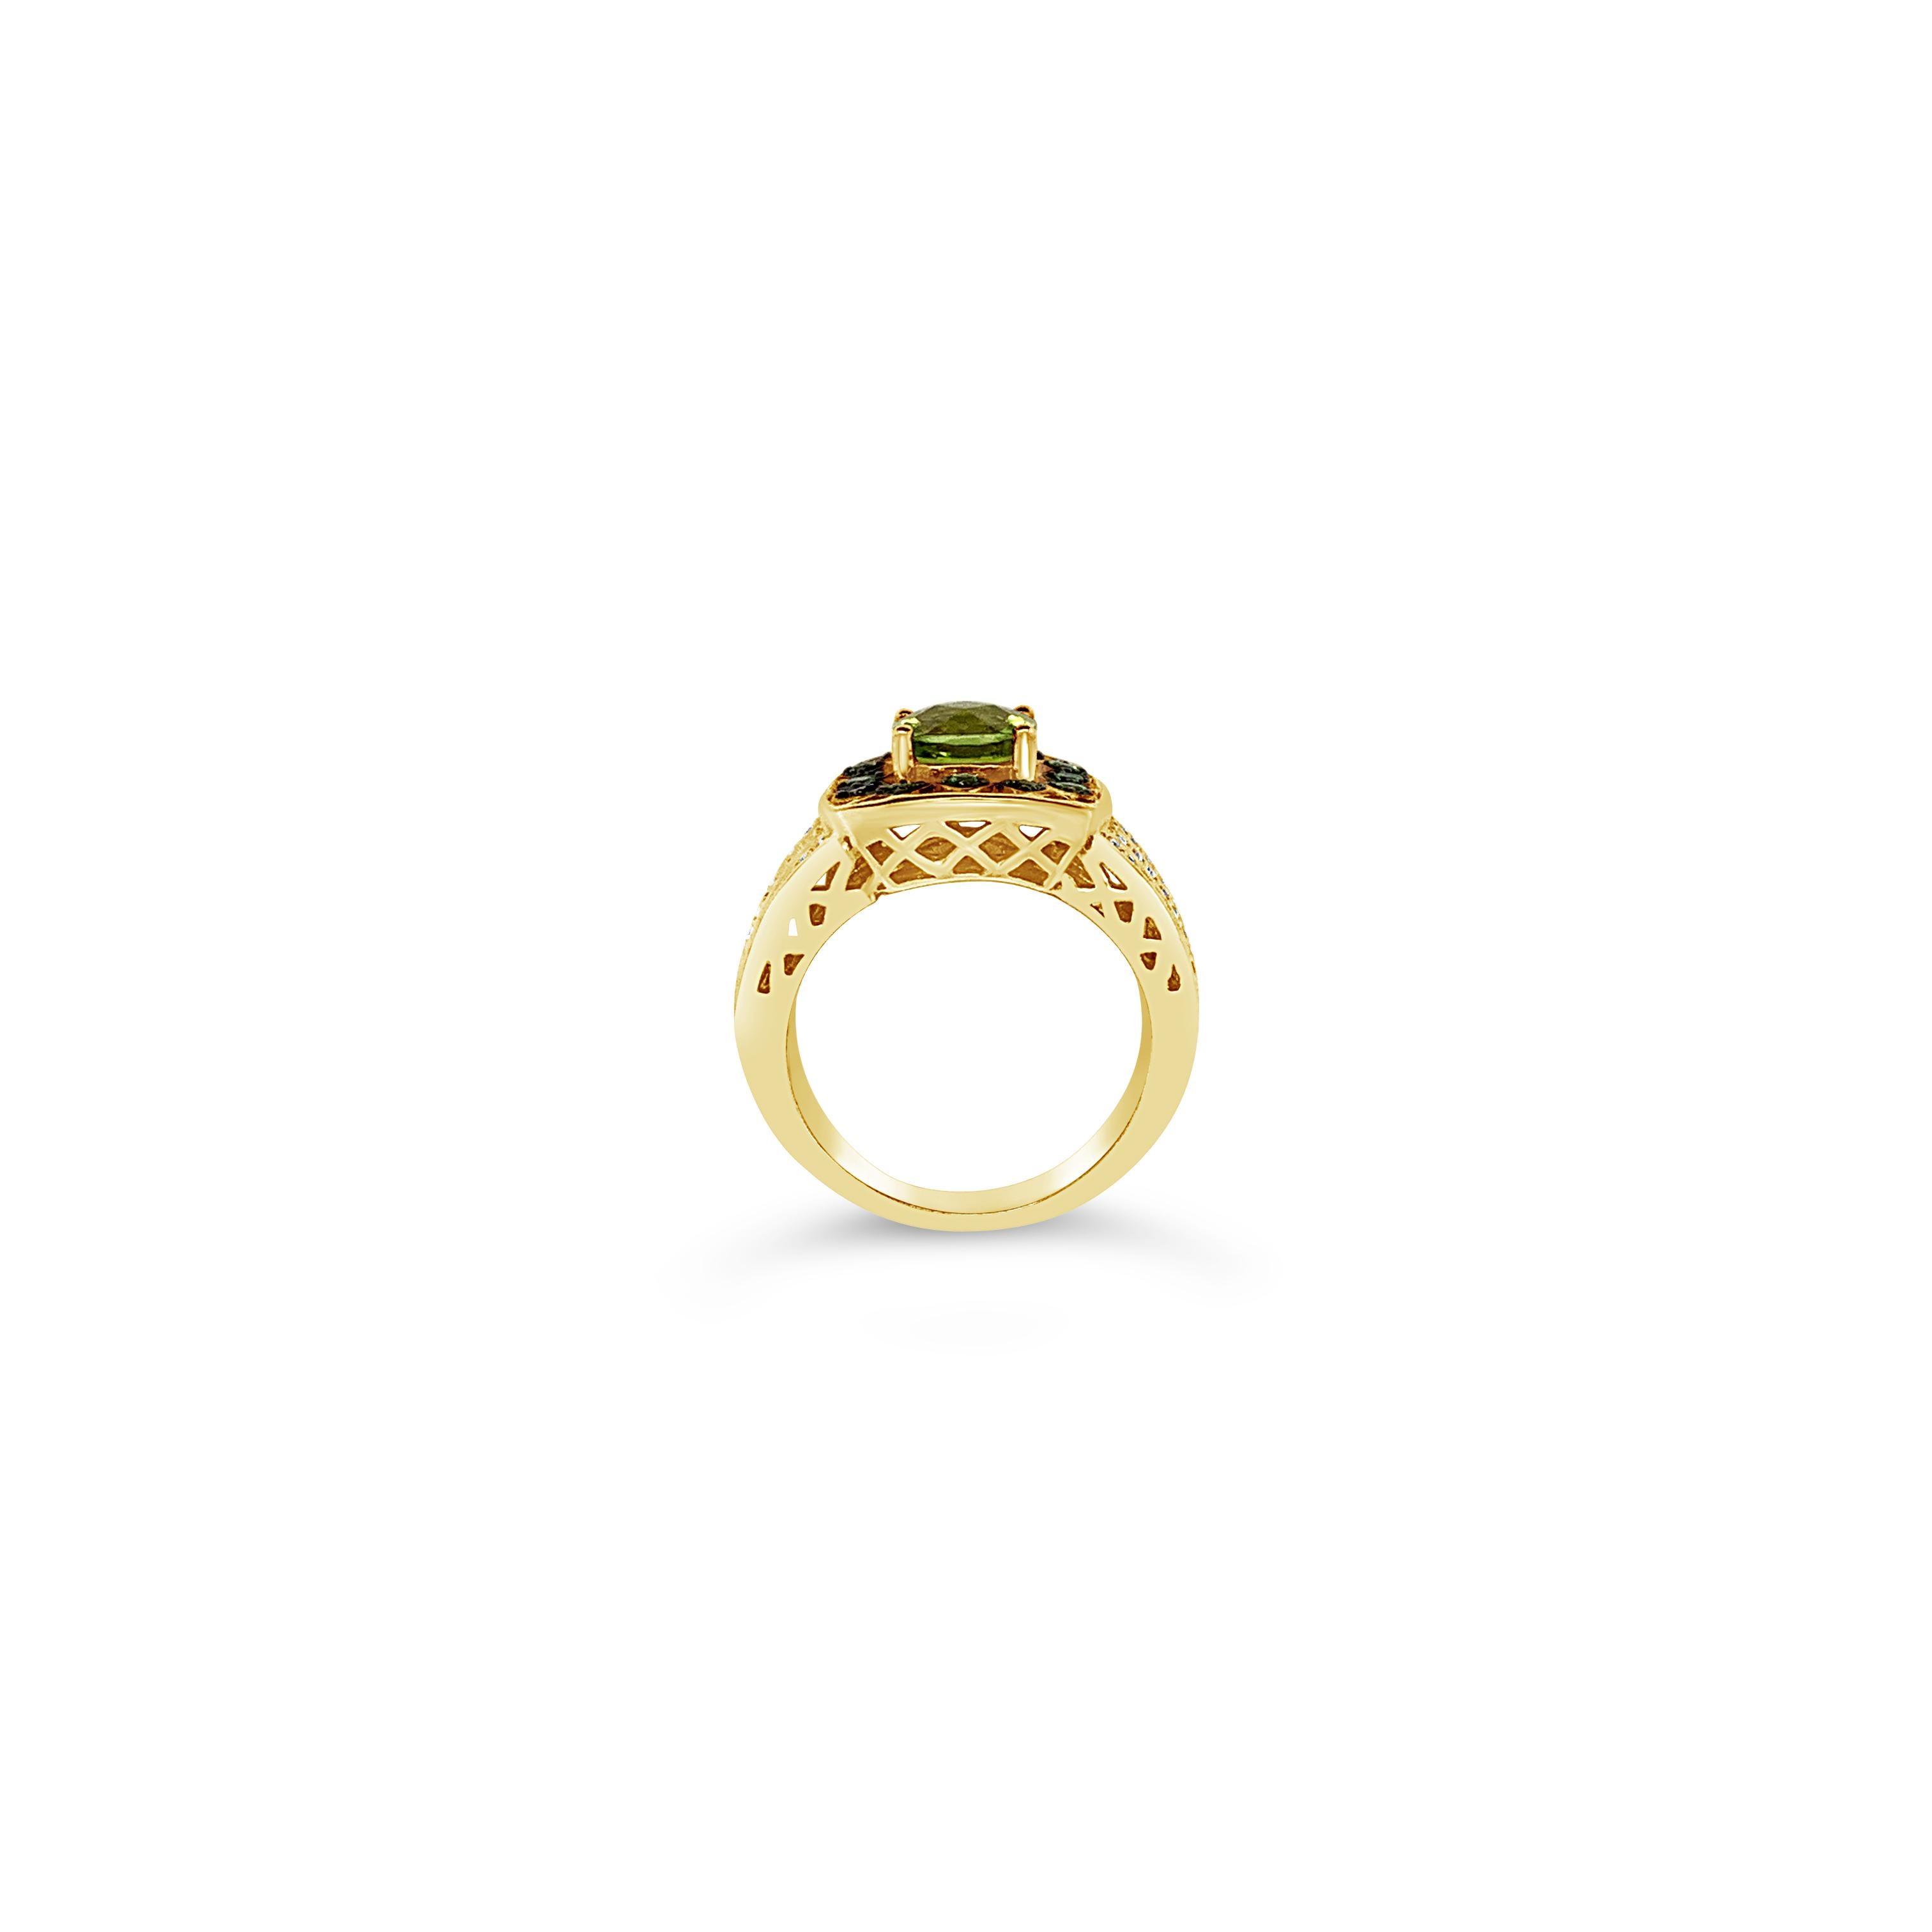 Le Vian® Ring featuring 1.55 cts. Green Apple Peridot, 0.23 cts. Forest Green Tsavorite, 0.19 cts. Vanilla Diamonds® set in 14K Green Gold

Diamonds Breakdown:
.19 cts White Diamonds

Gems Breakdown:
1.55 cts Peridot
.23 cts Tsavorite

Ring Size